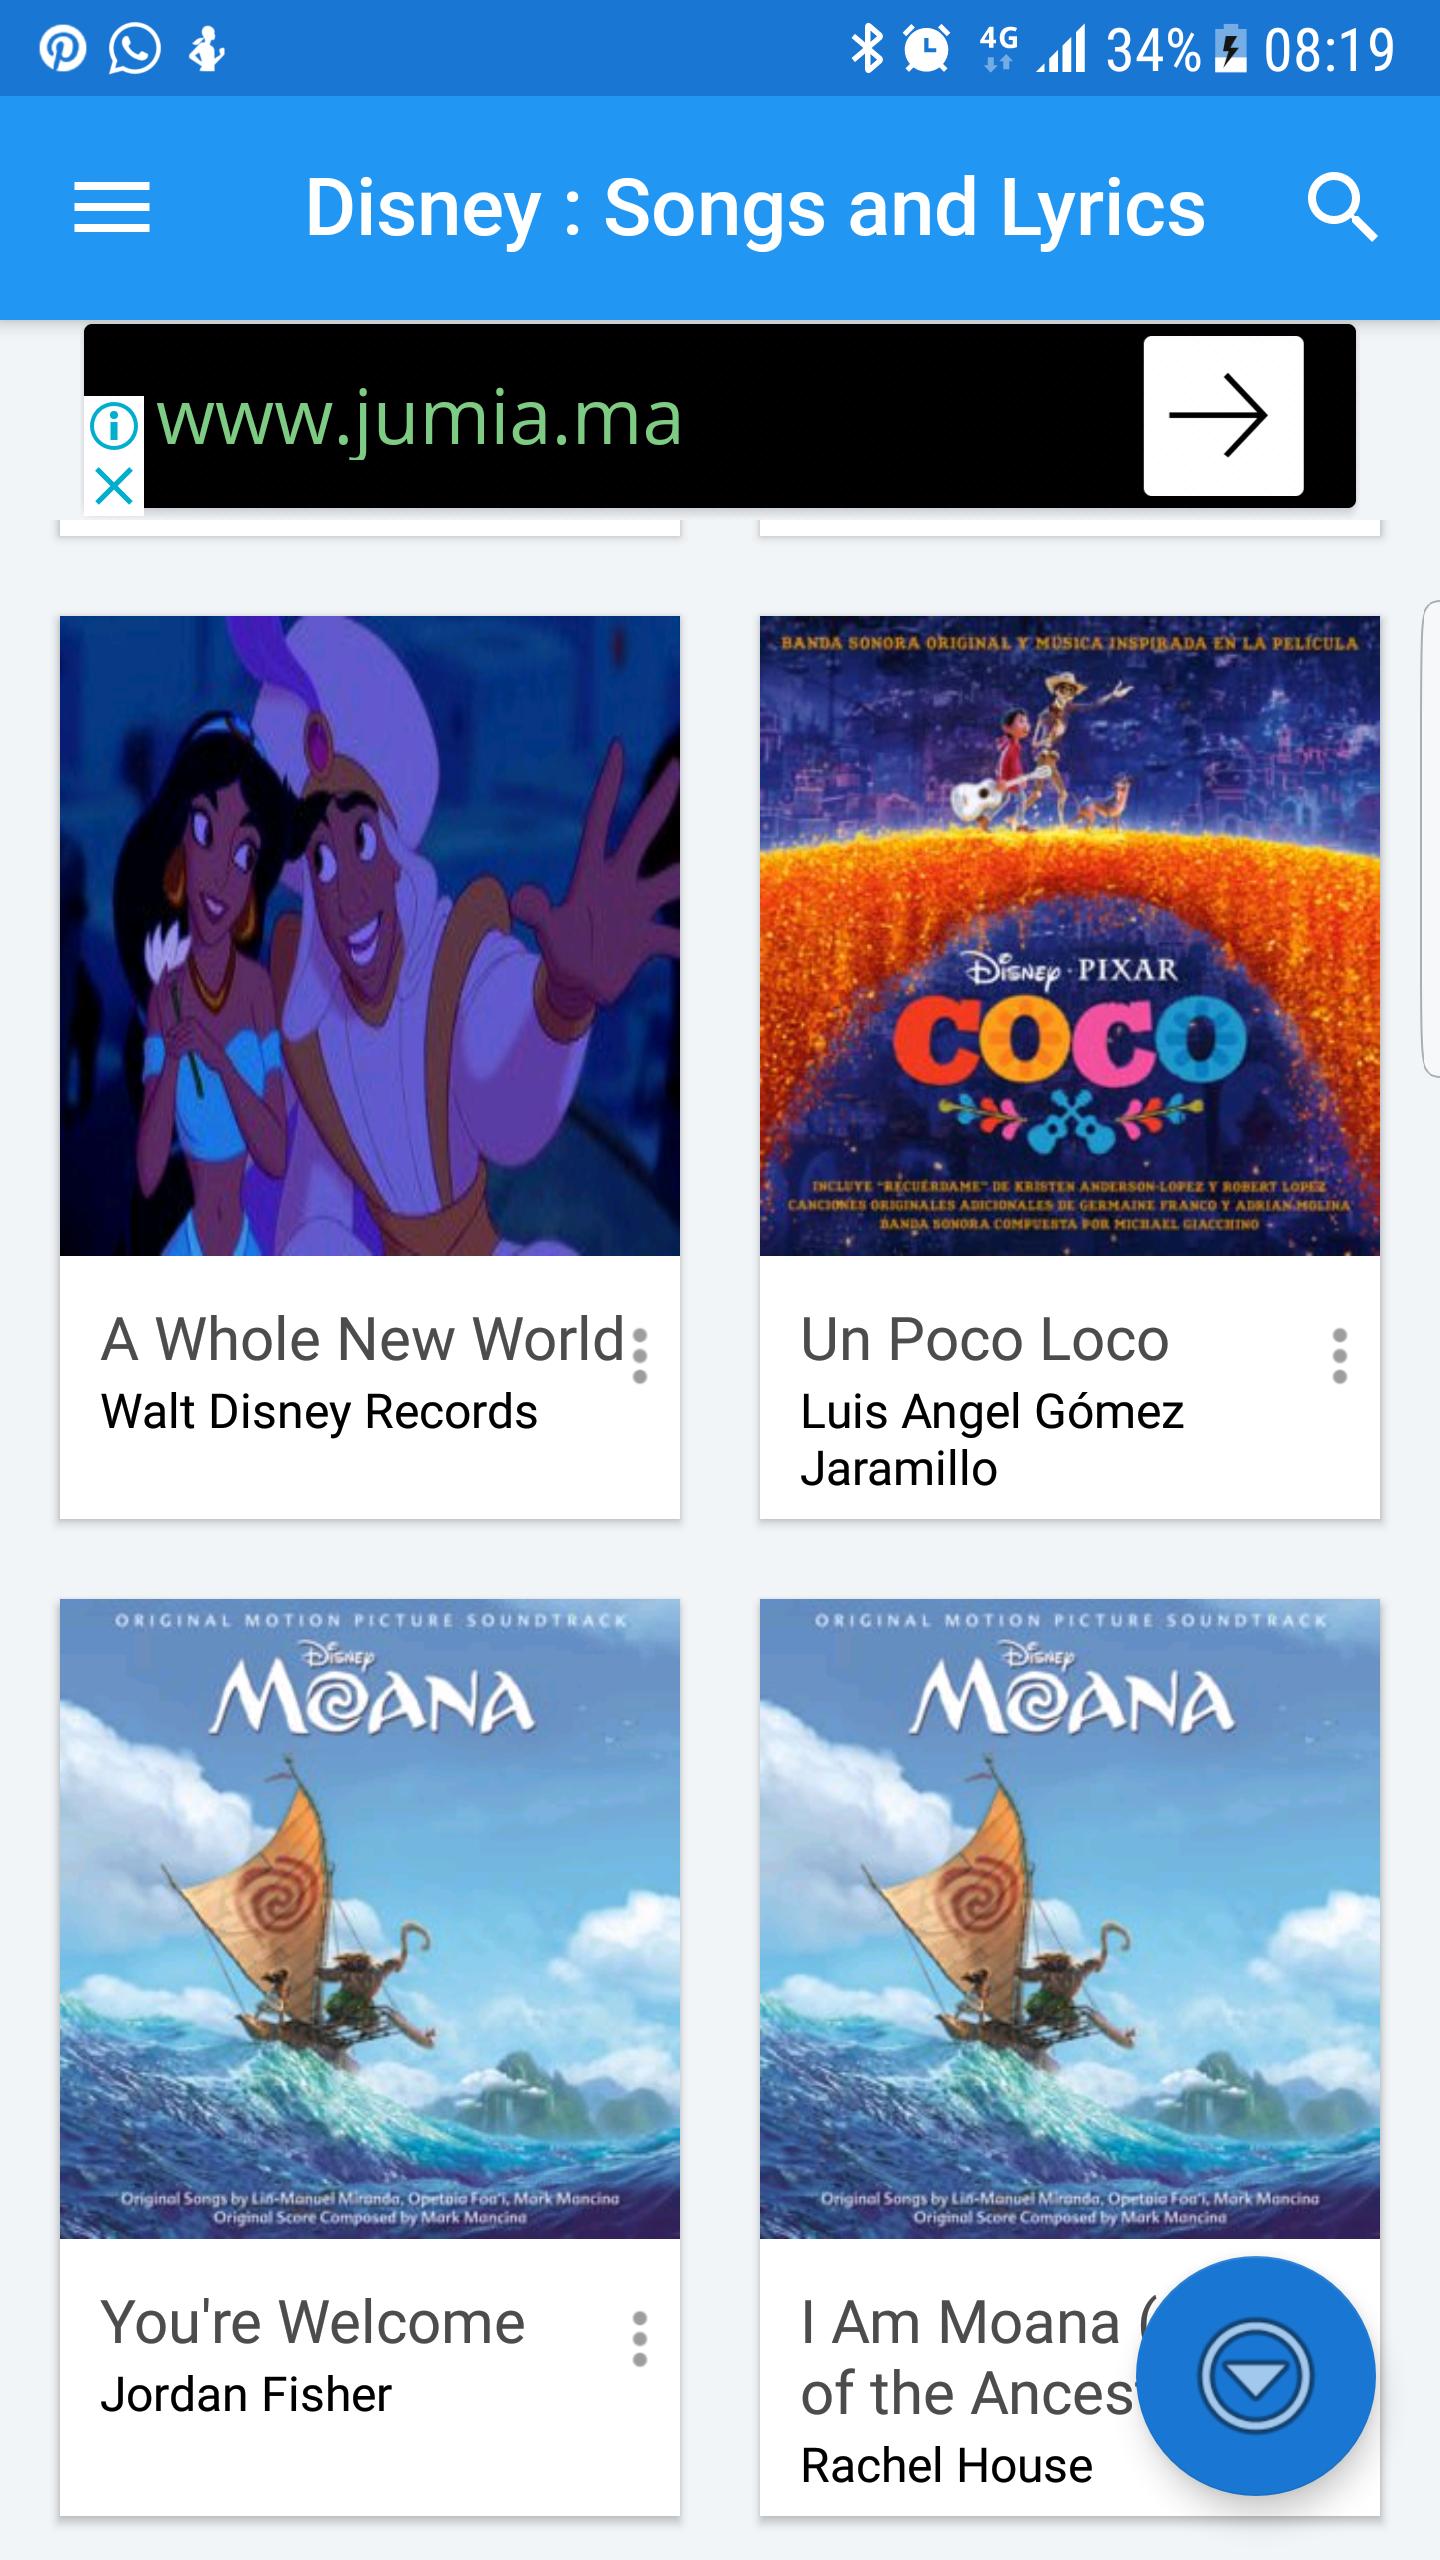 All Songs Lyrics For Disney Like Coco Or Moana For Android Apk Download